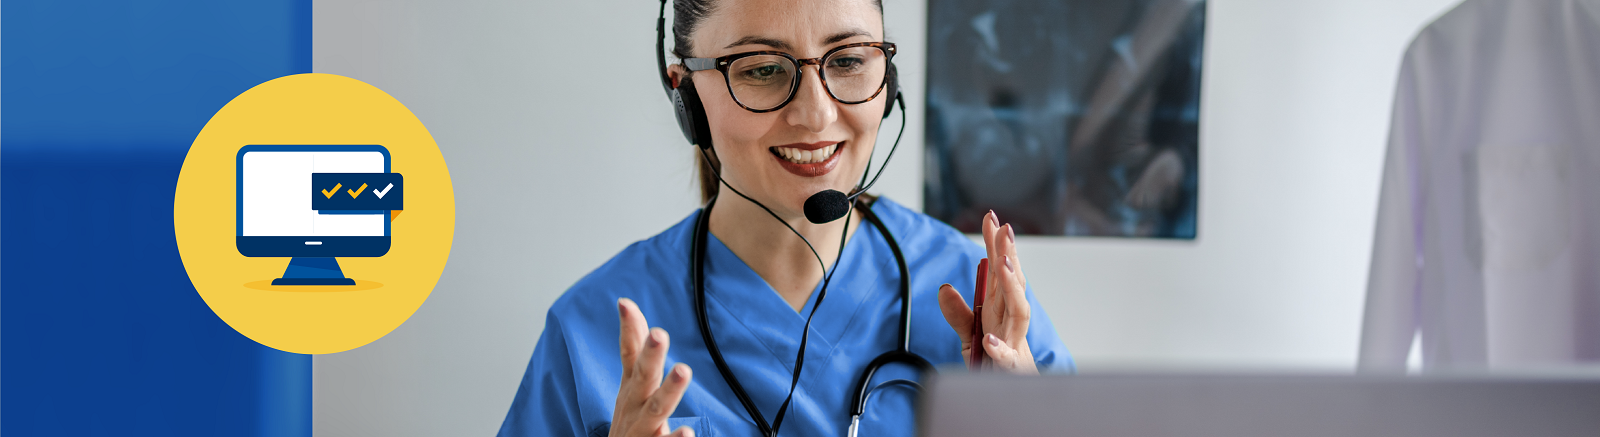 Graphic of computer with checkmarks in it next to a smiling nurse wearing a headset with a computer in the foreground, indicating she is on a video call